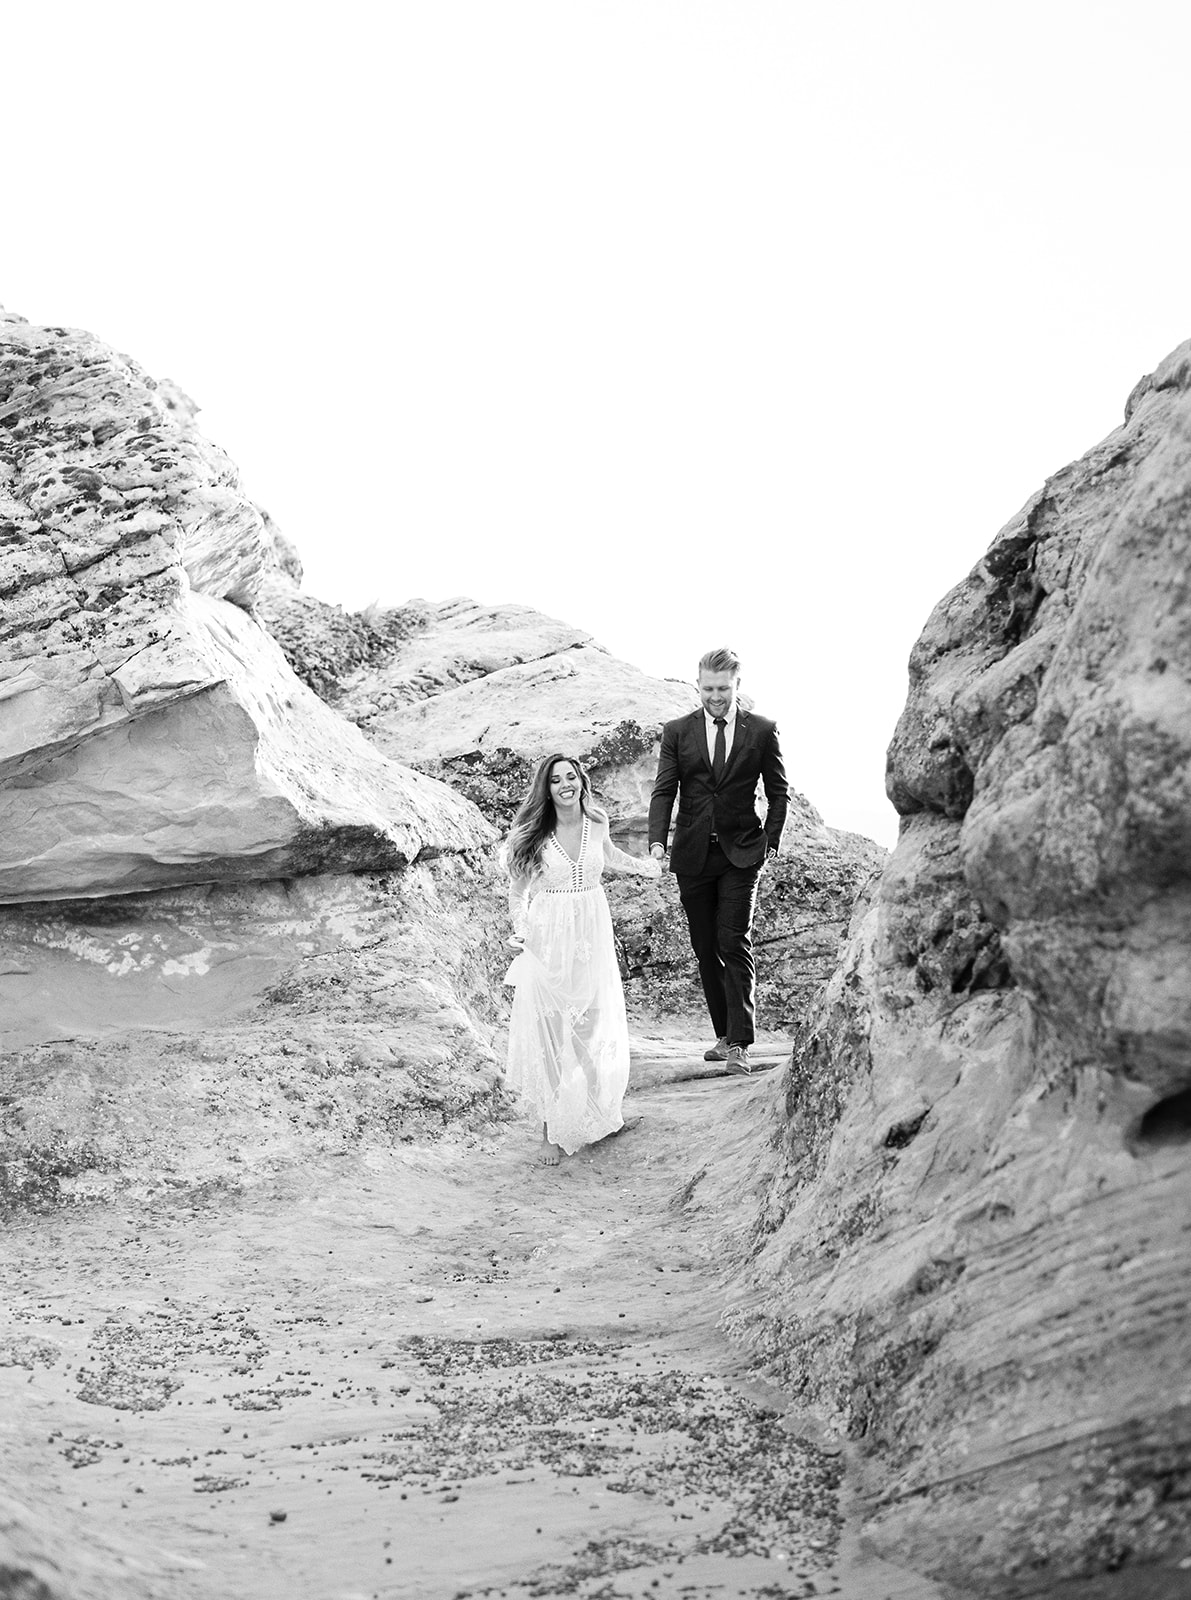 black and white pictures of a bride and groom exploring zion national park. moments after their elopement ceremony